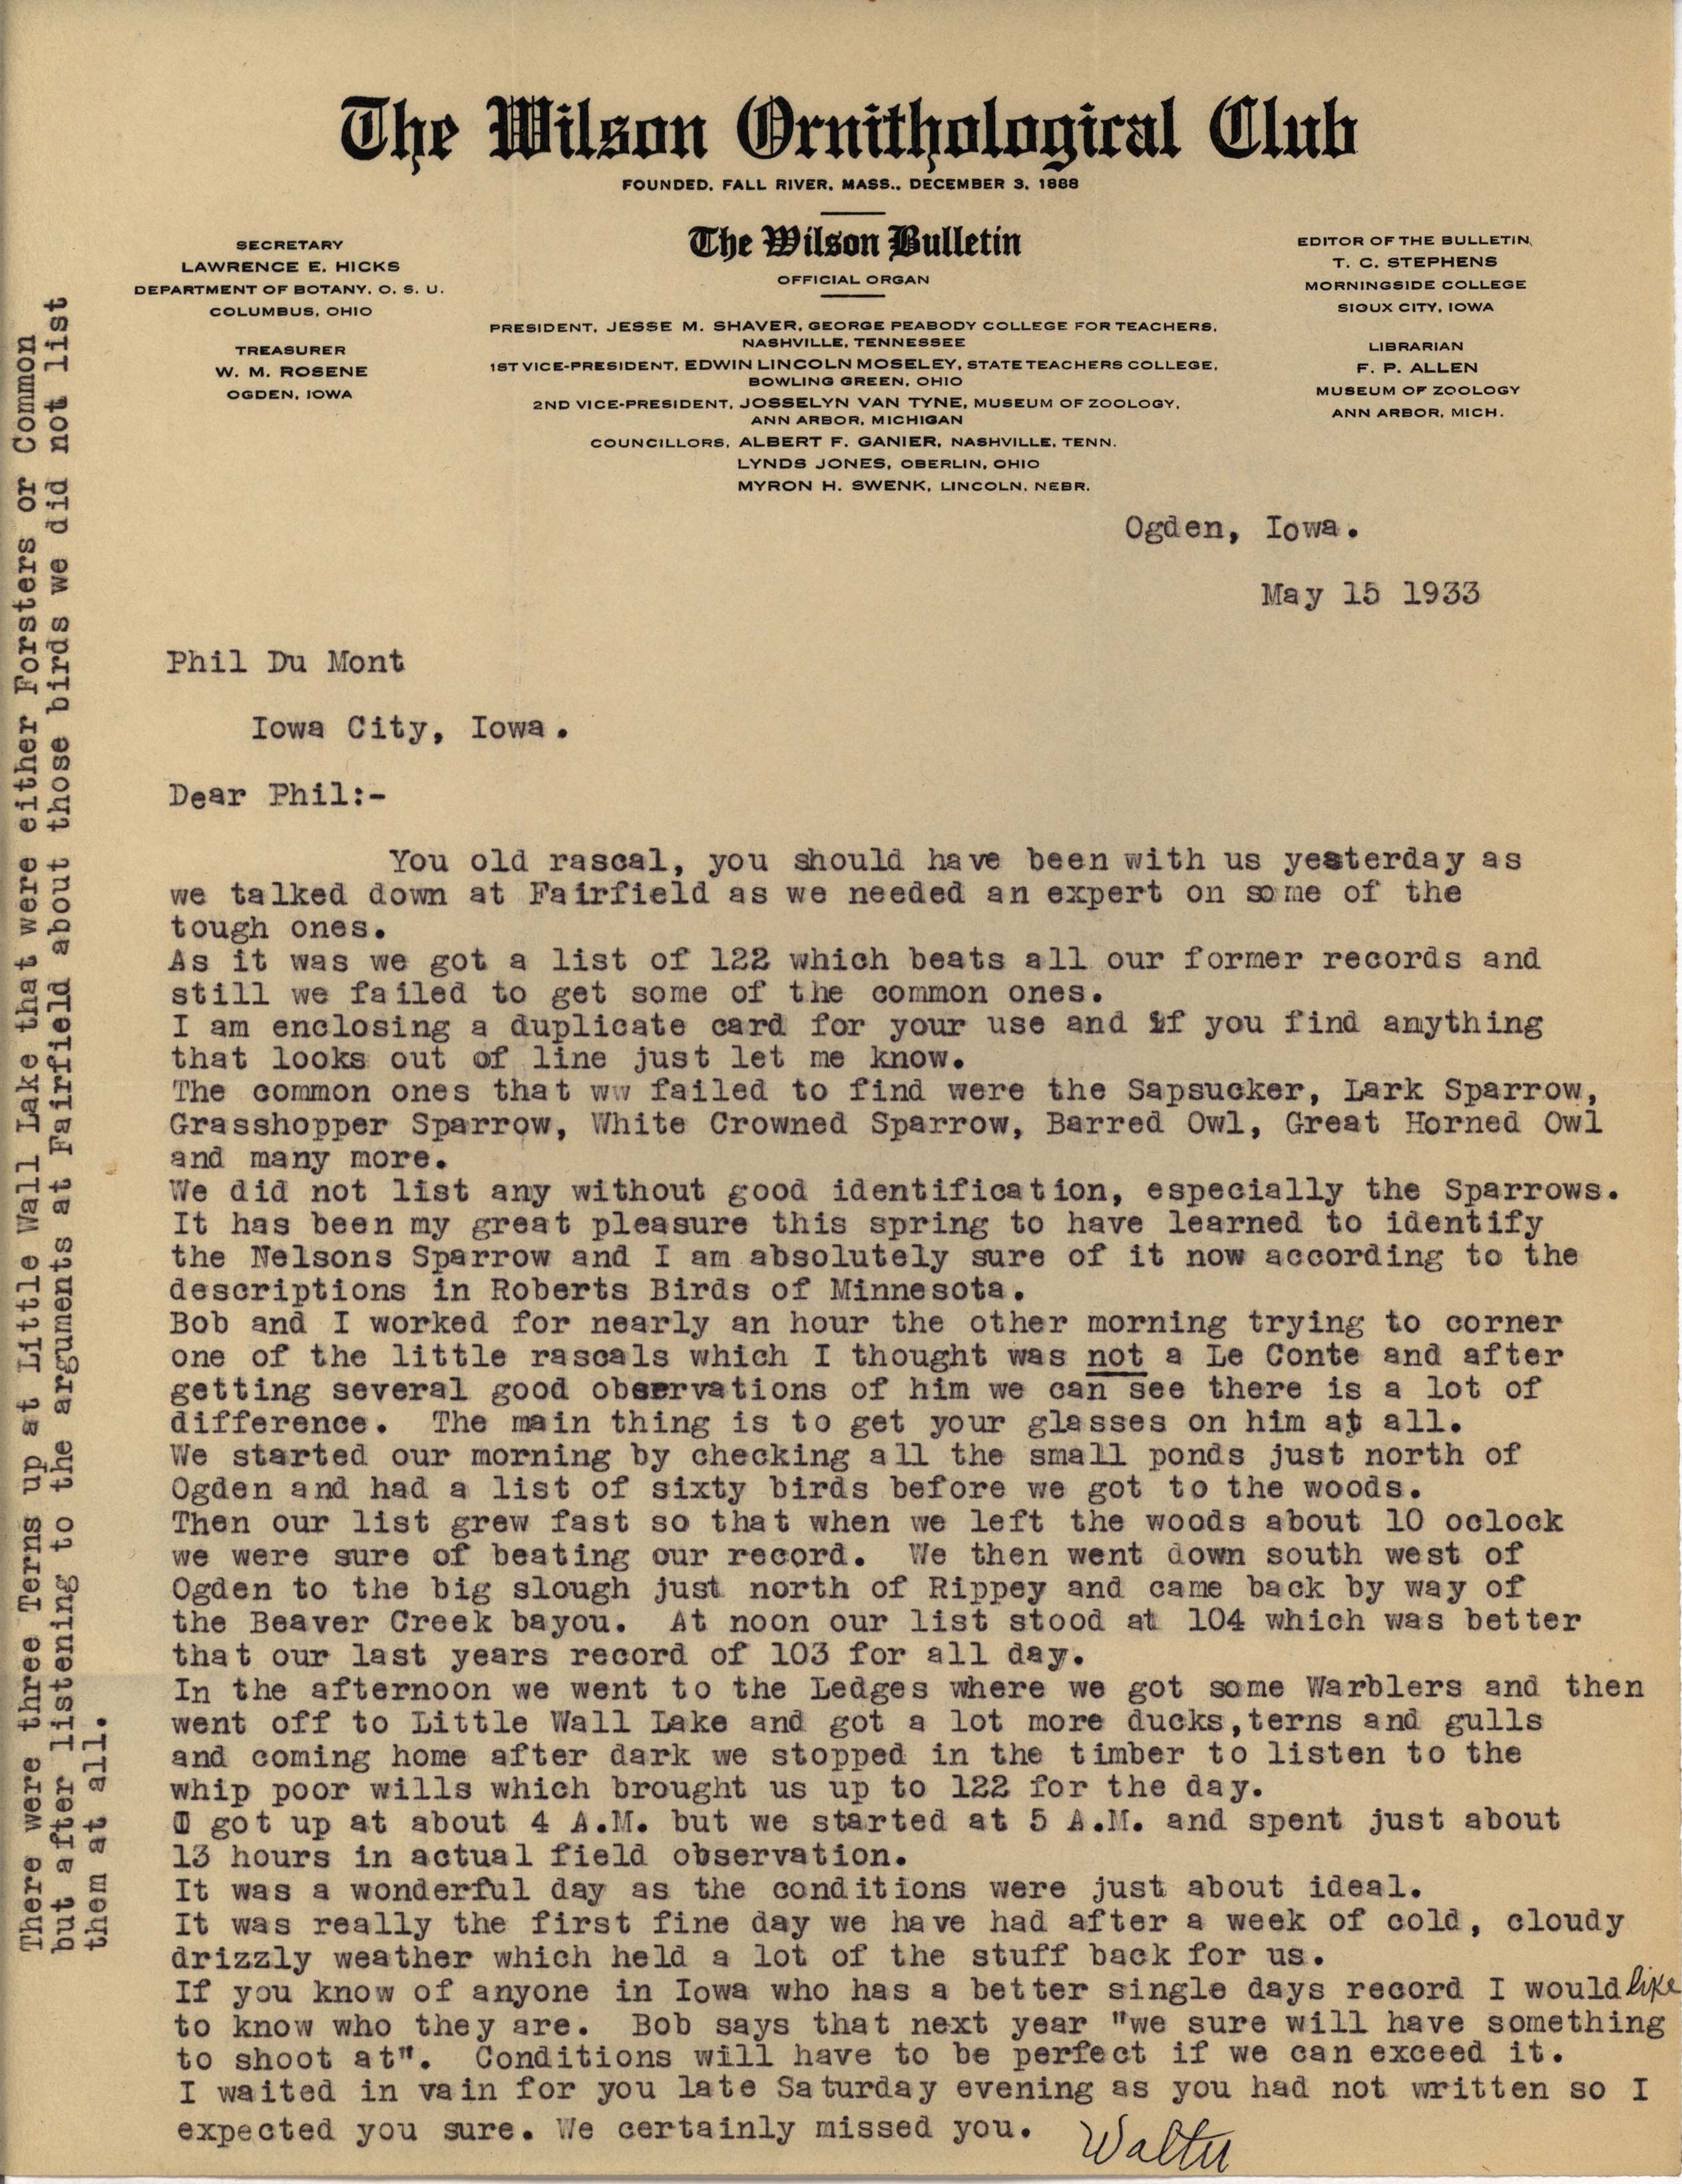 Walter Rosene letter to Philip DuMont regarding a single day record for bird sightings, May 15, 1933